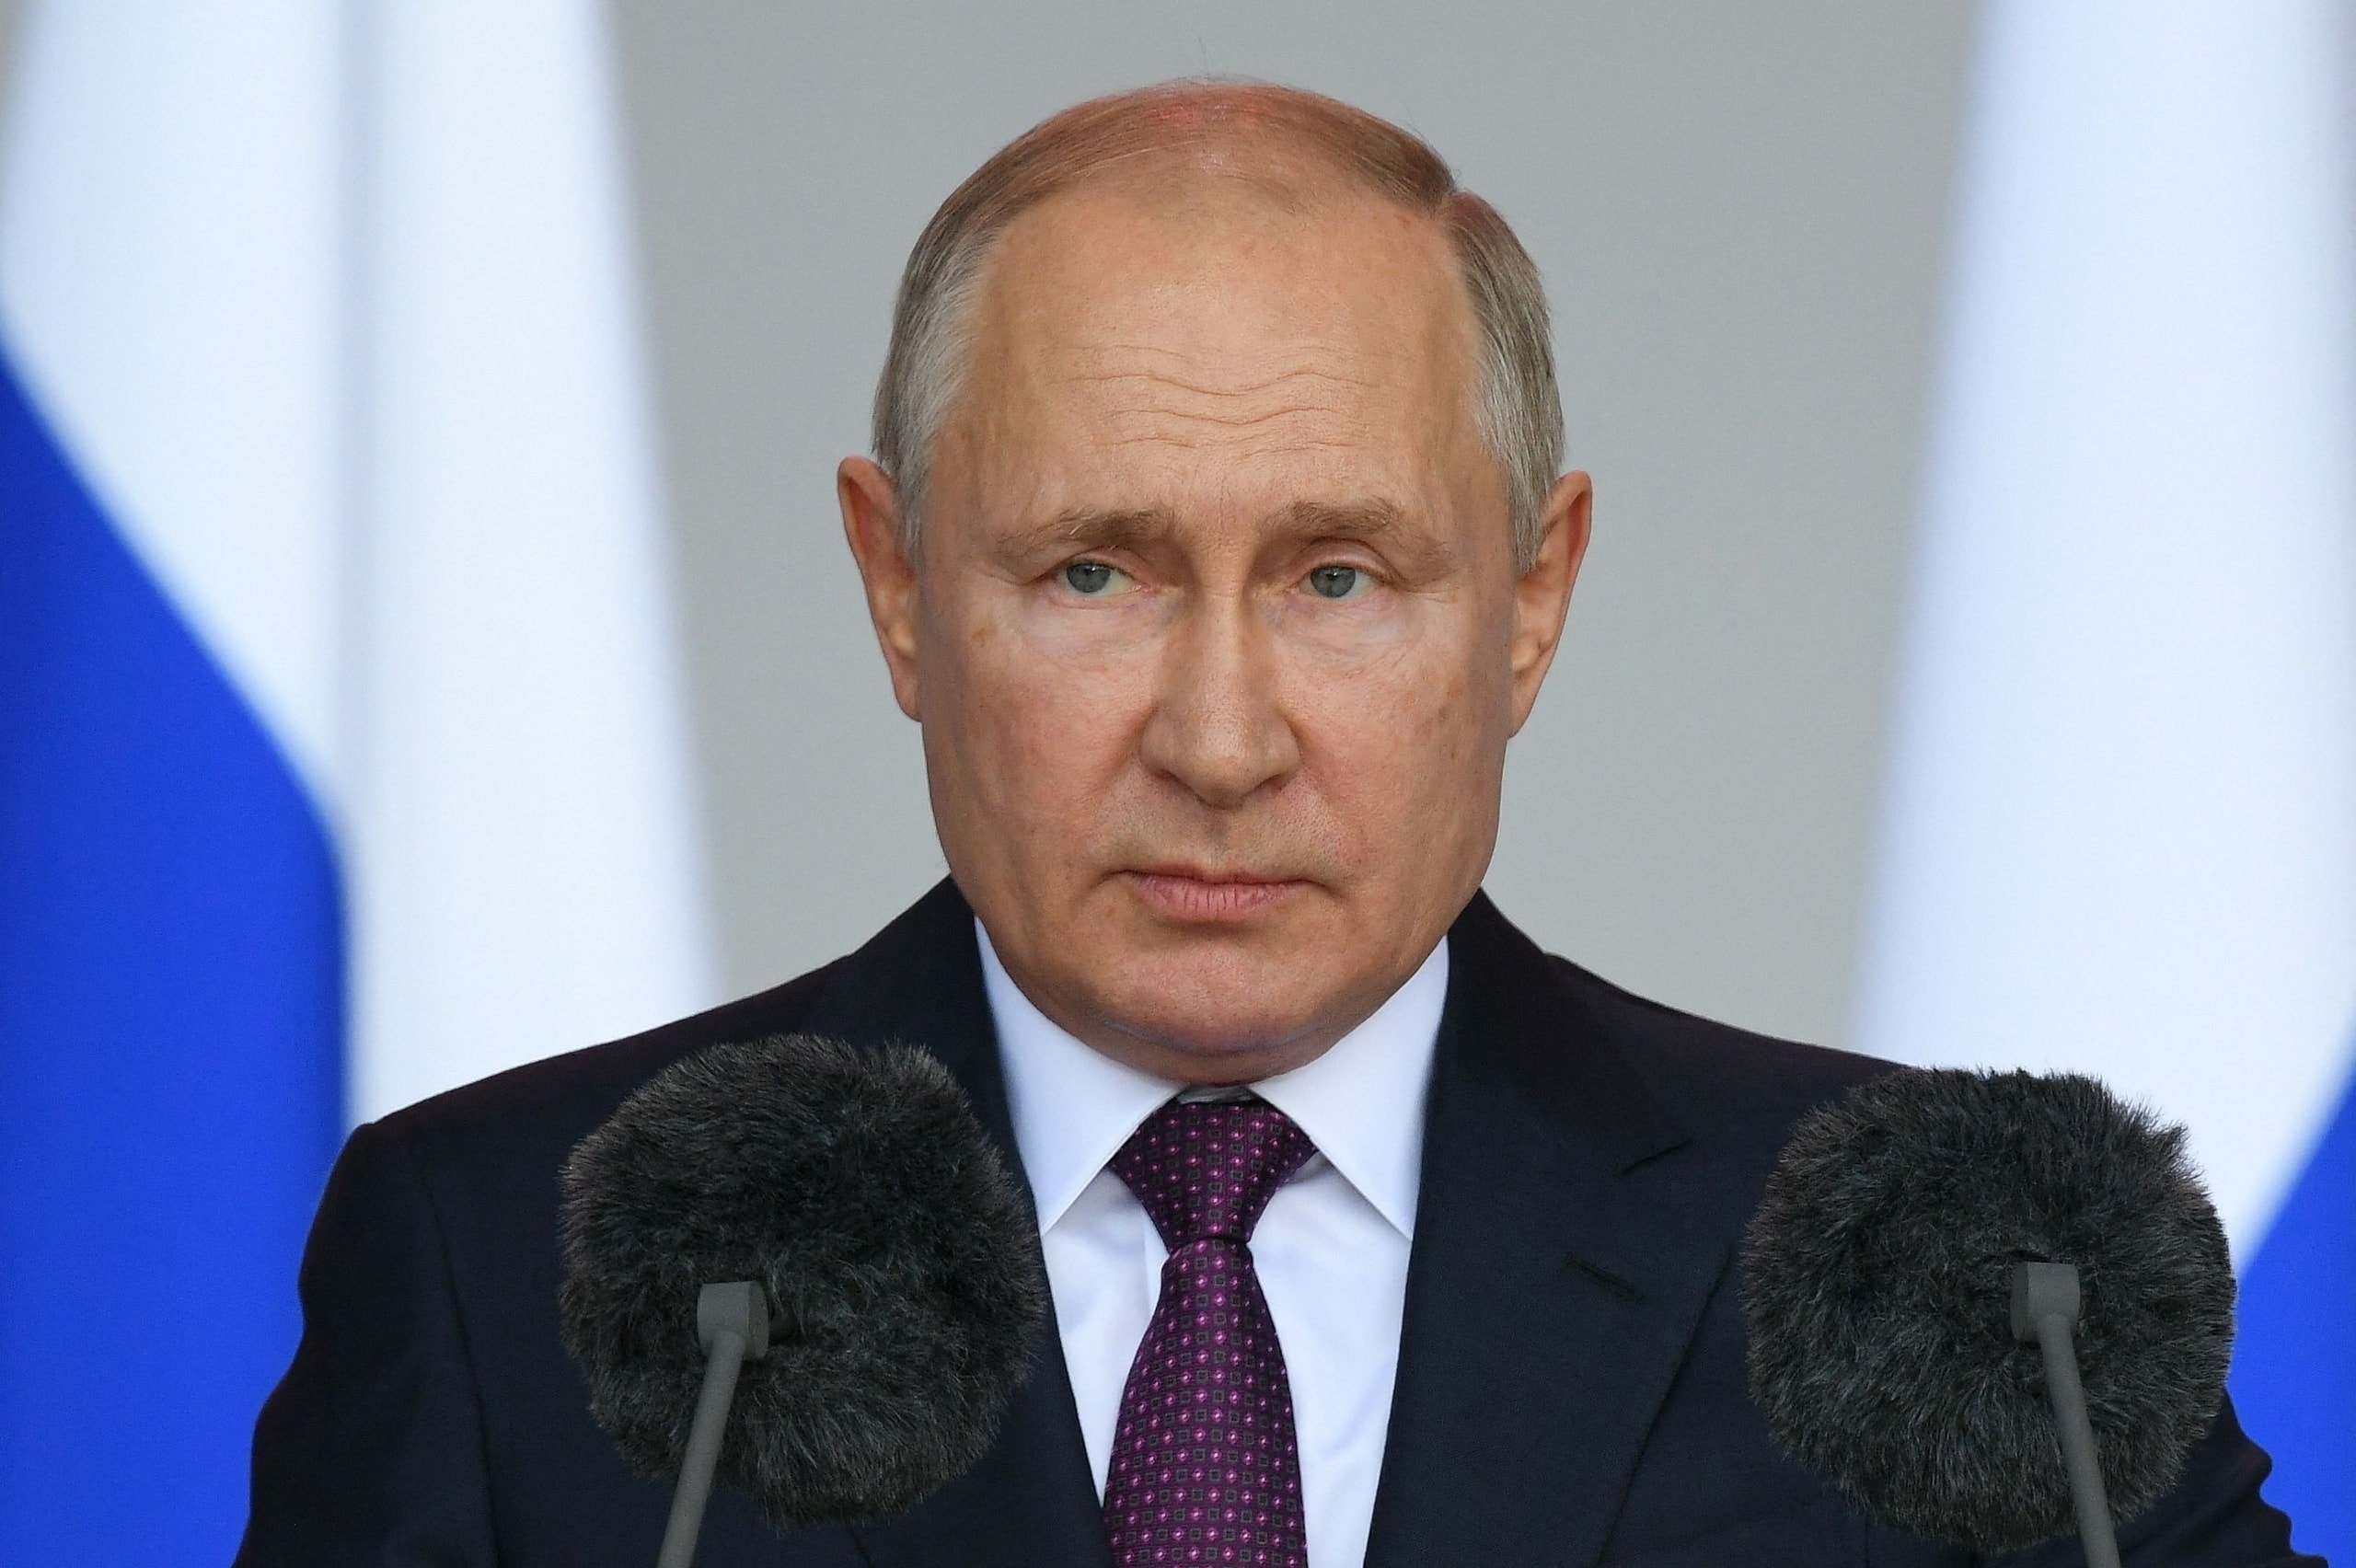 Putin Escalates Ukraine War As He Taps Military Reserves: Says 'Not A Bluff,' Russia's Abilities 'More Modern' Than NATO